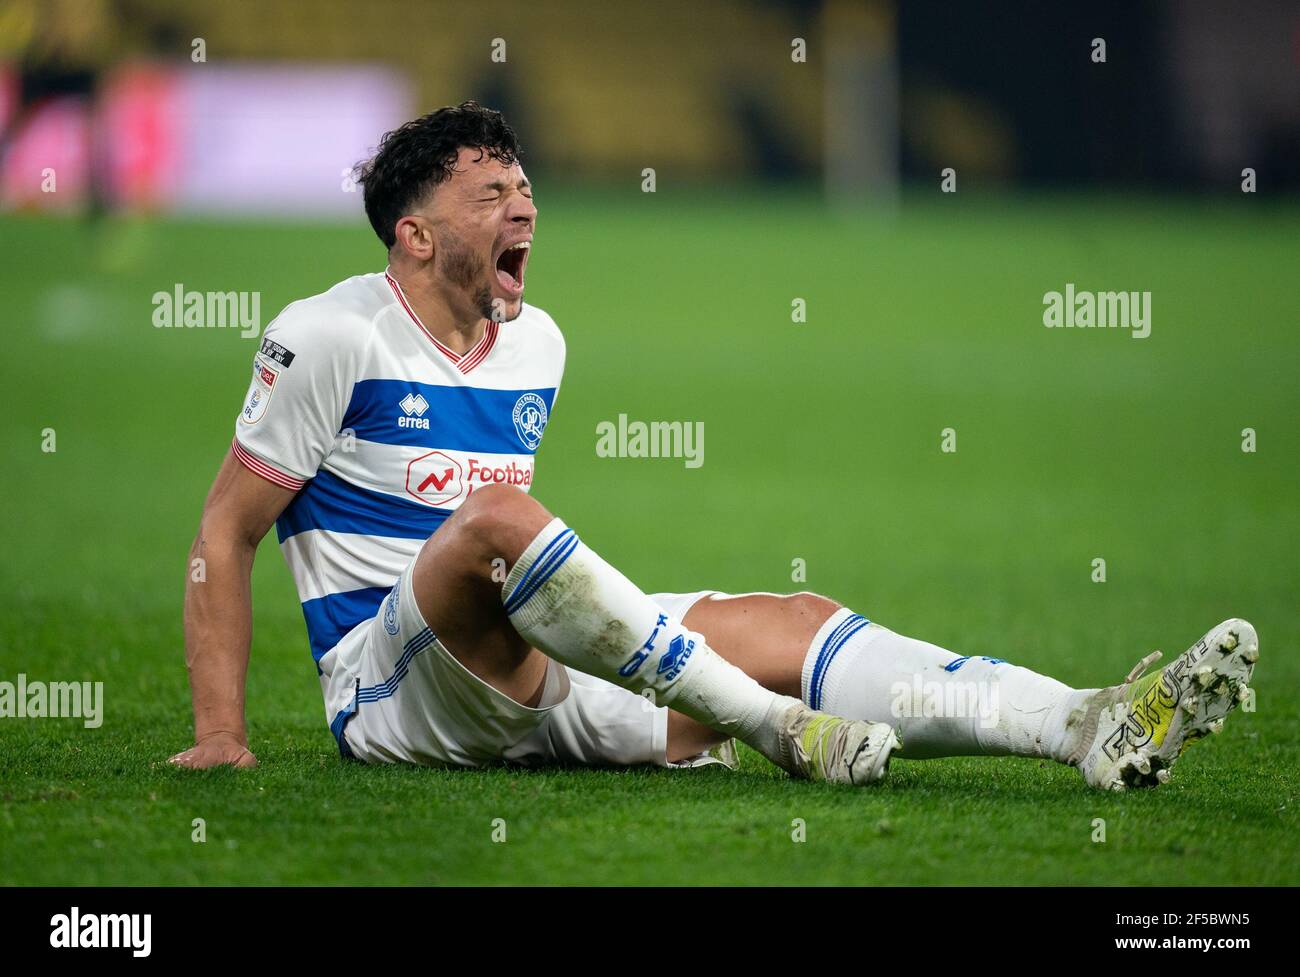 Macauley Bonne of QPR during the Sky Bet Championship behind closed doors match between Watford and Queens Park Rangers at Vicarage Road, Watford, Eng Stock Photo